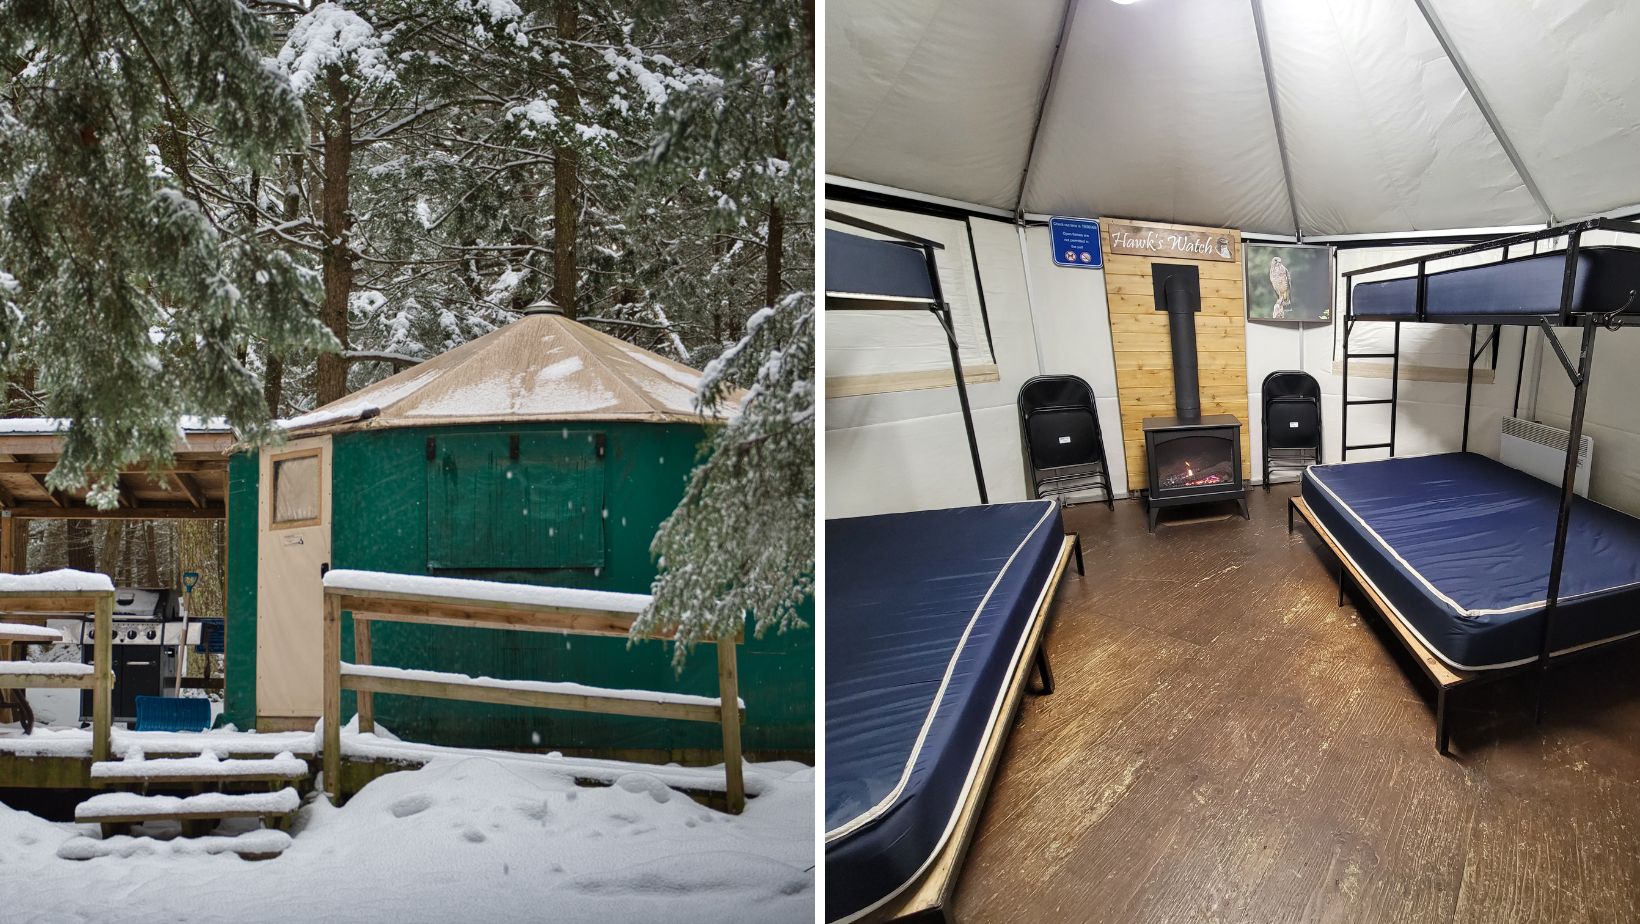 collage of exterior of yurt surrounded by snow, interior of yurt with bunk beds and stove